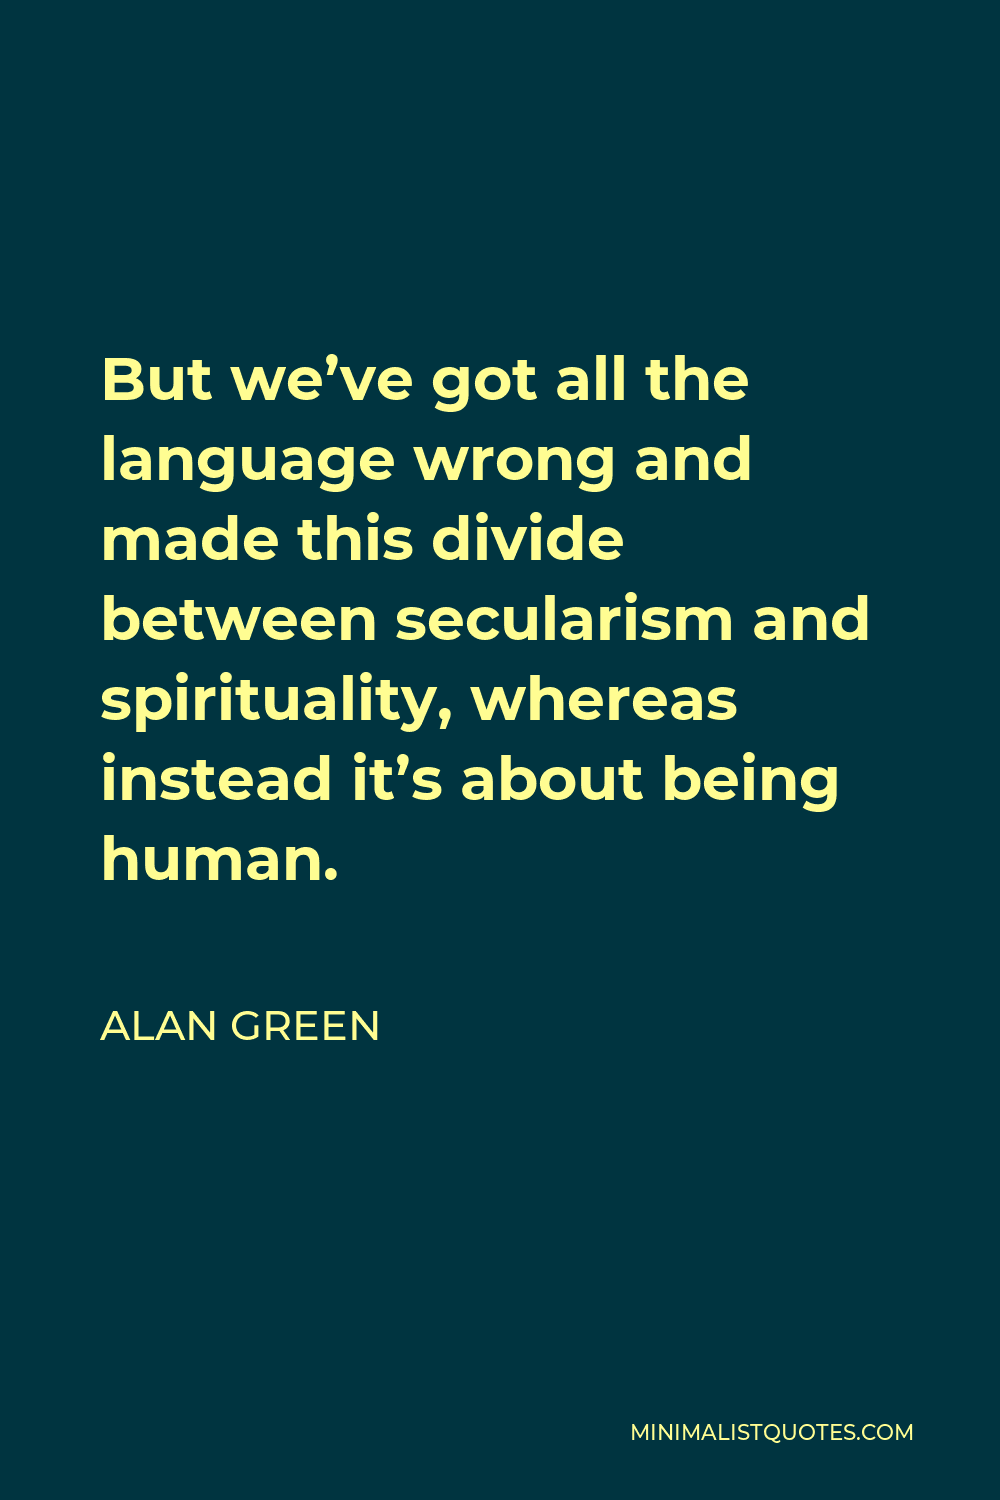 Alan Green Quote - But we’ve got all the language wrong and made this divide between secularism and spirituality, whereas instead it’s about being human.